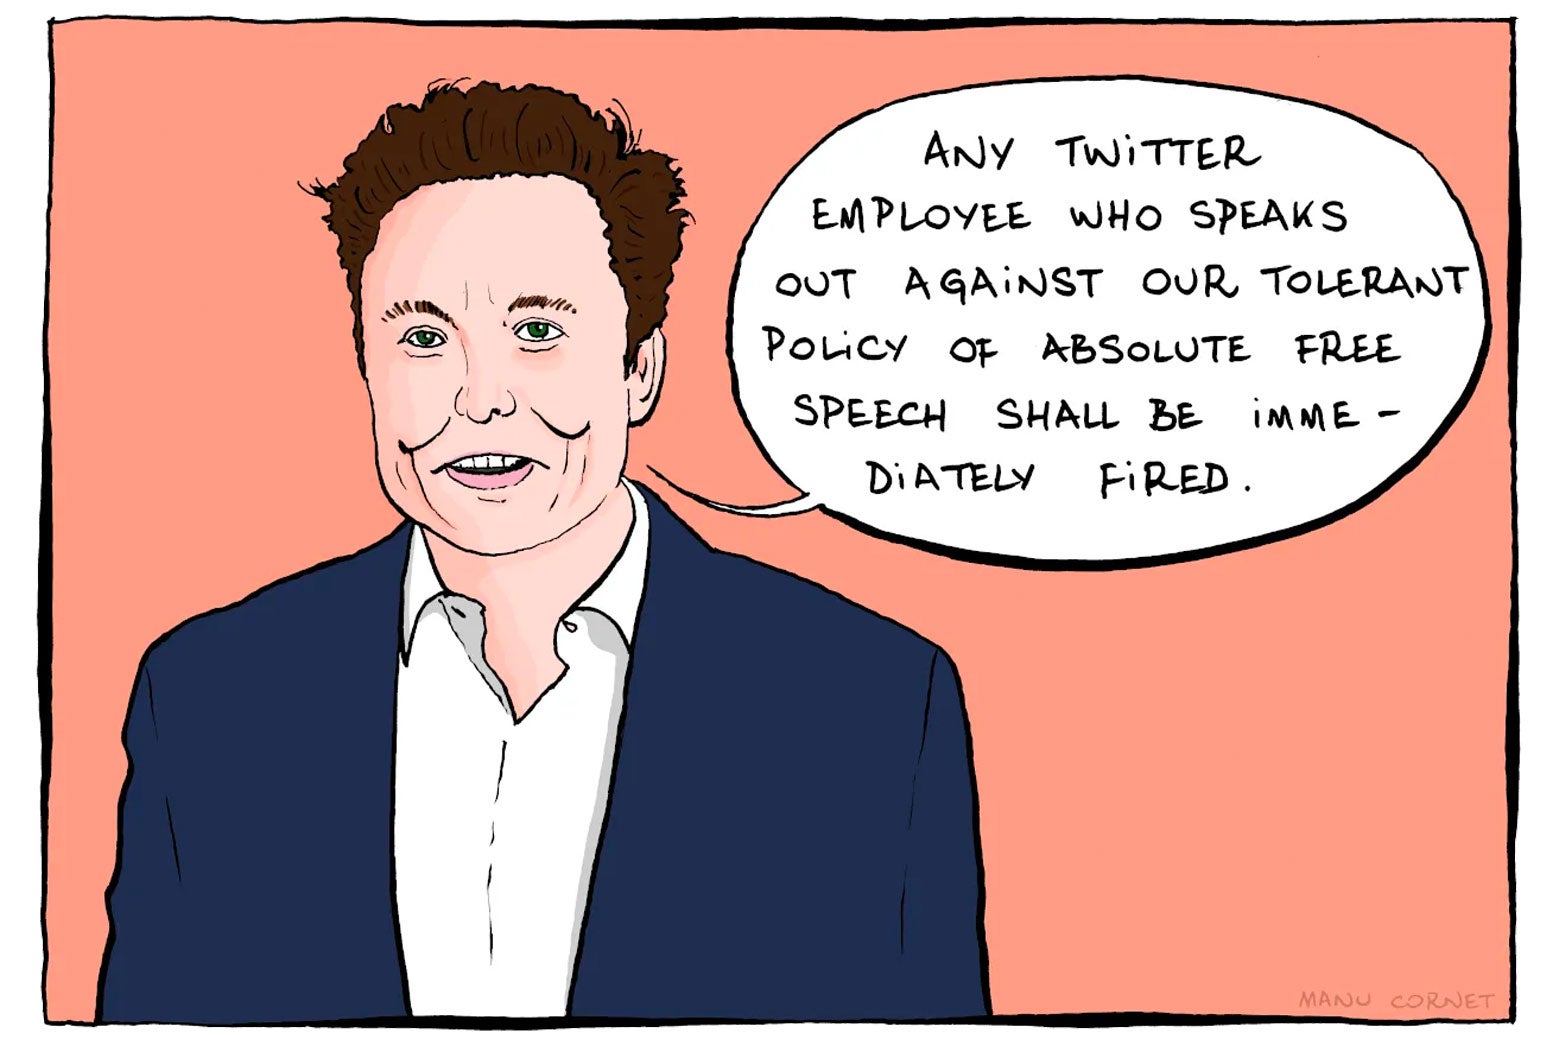 The Elon Musk cartoon presents a scary choice for Twitter employees.